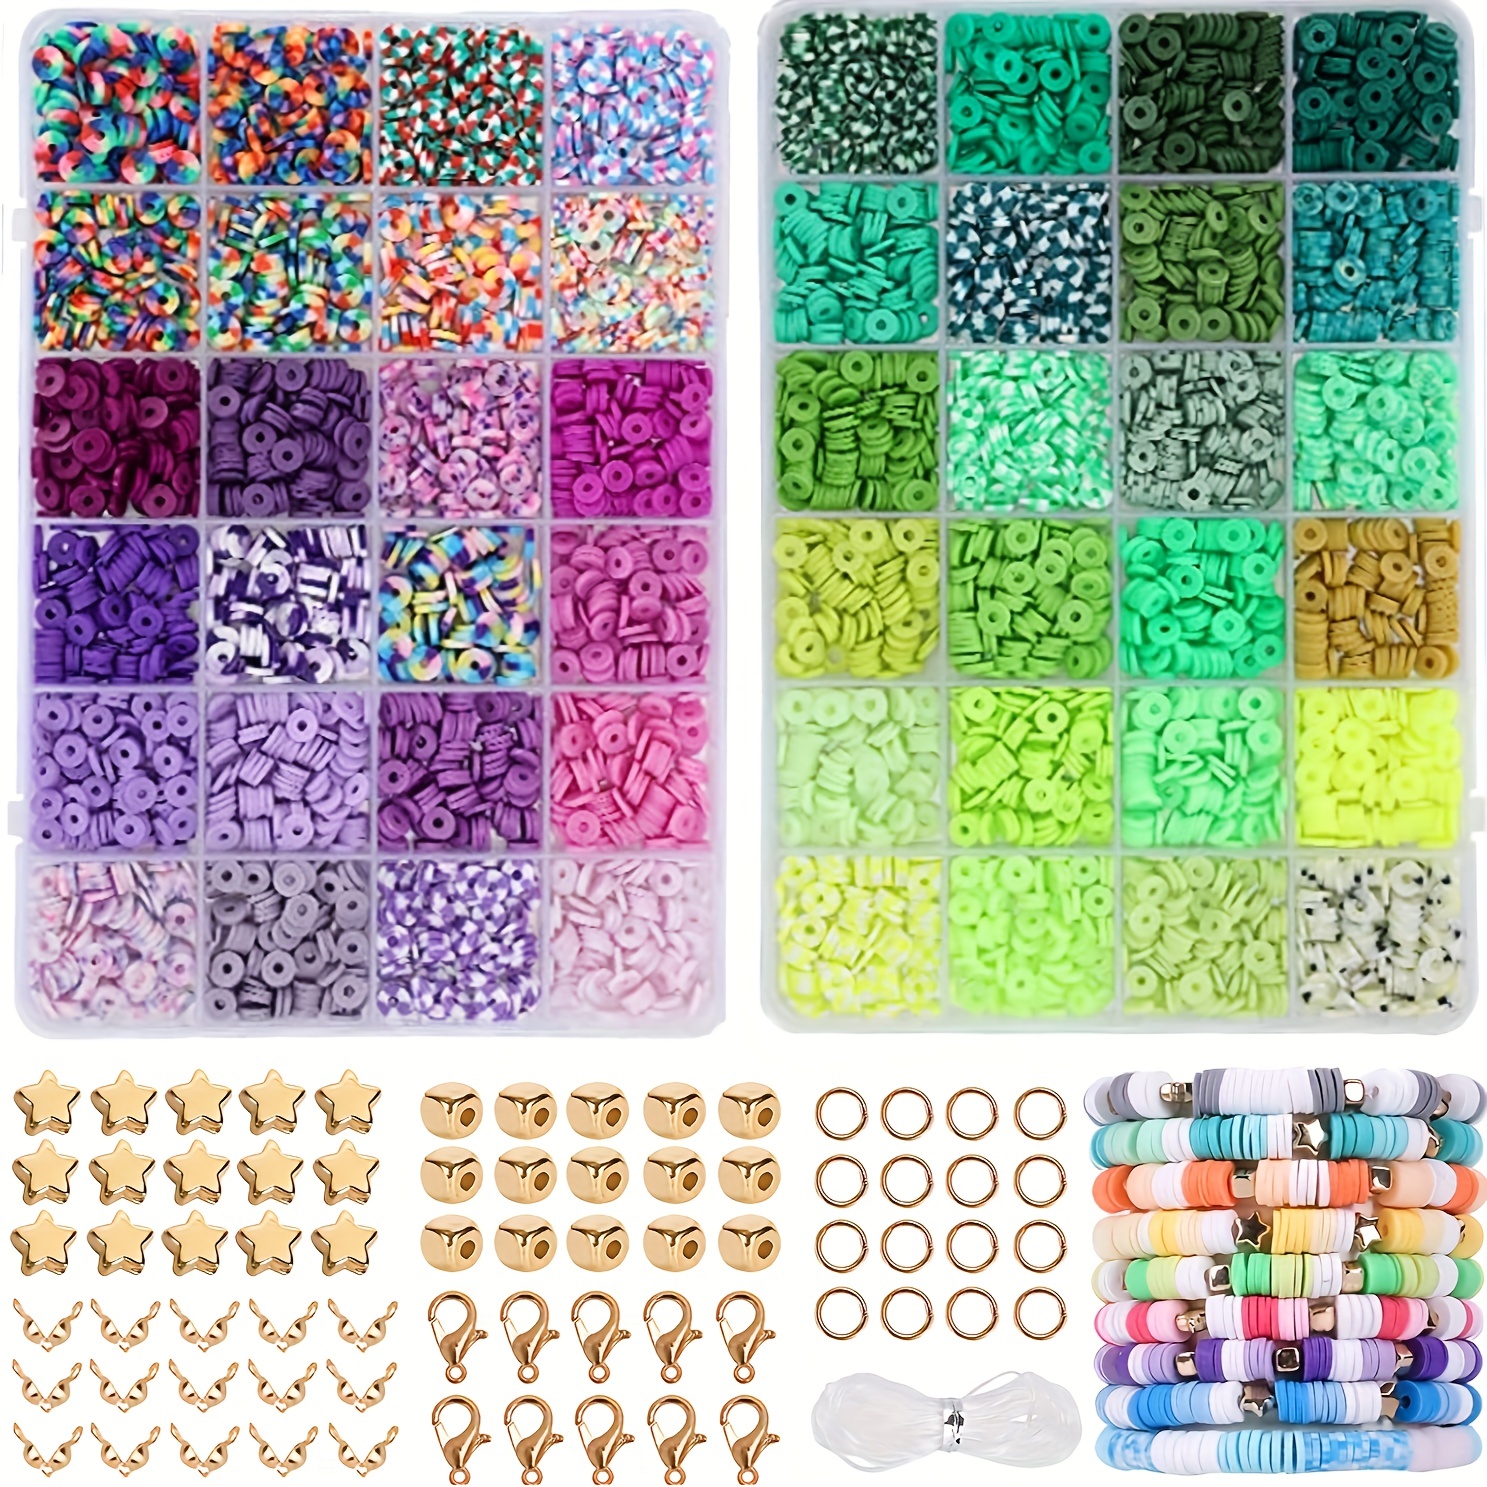 4800pcs 48-Color Polymer Clay Bead Set With Diy Tool & Cord For